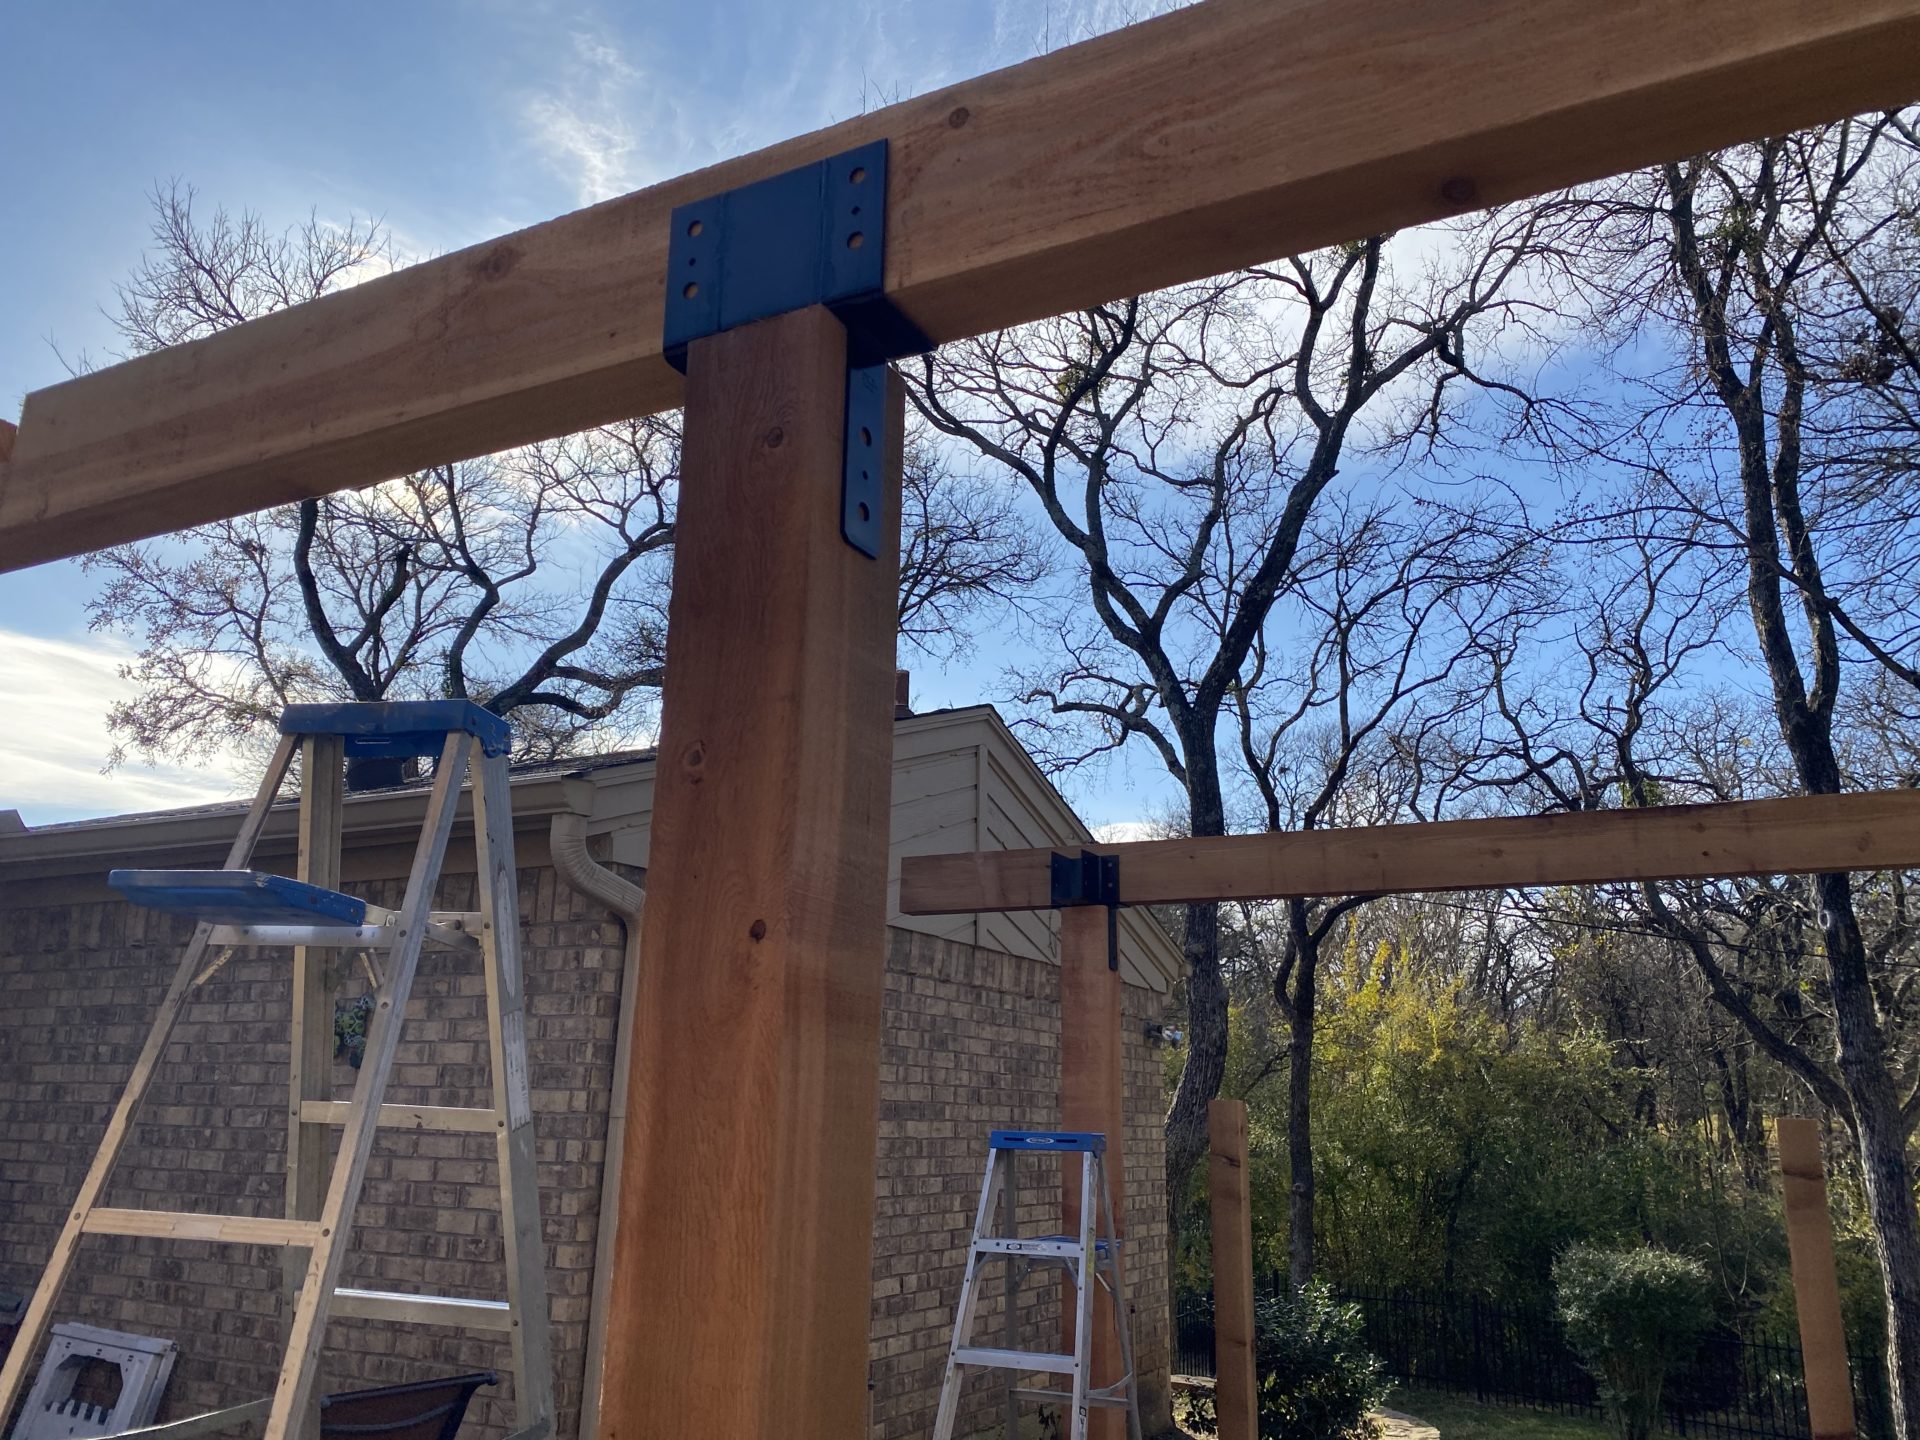 Support beams for a patio roof construction project in a residential home's backyard in North Texas.